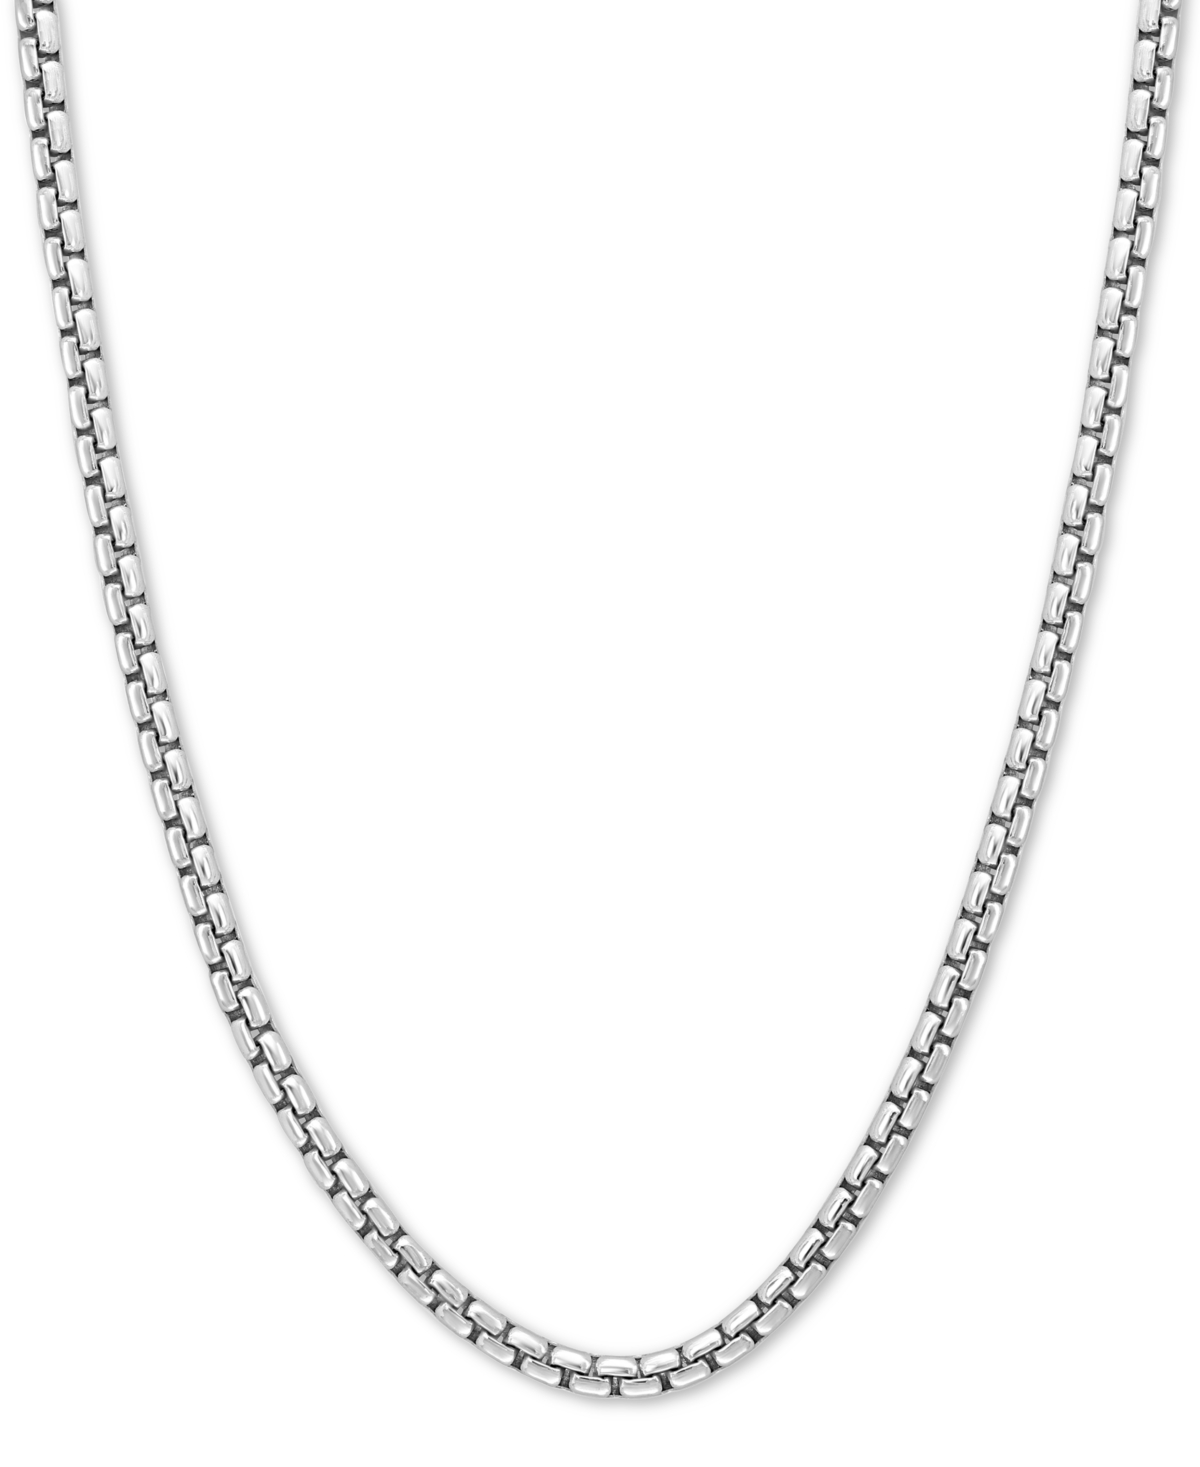 Effy Rounded Box Link 24" Chain Necklace in Sterling Silver - Silver